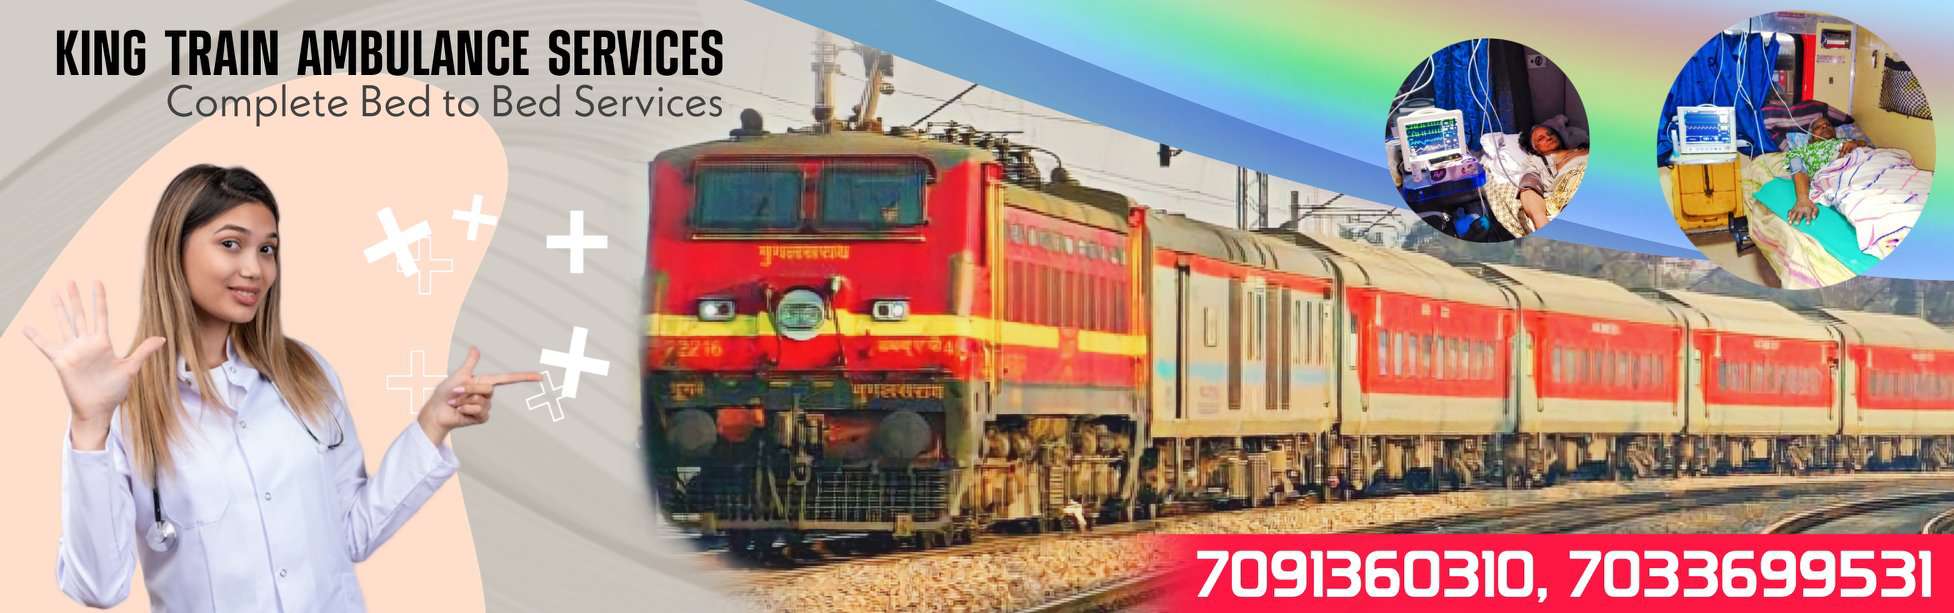 Hire Train Ambulance Services from Kolkata At Lowest Cost